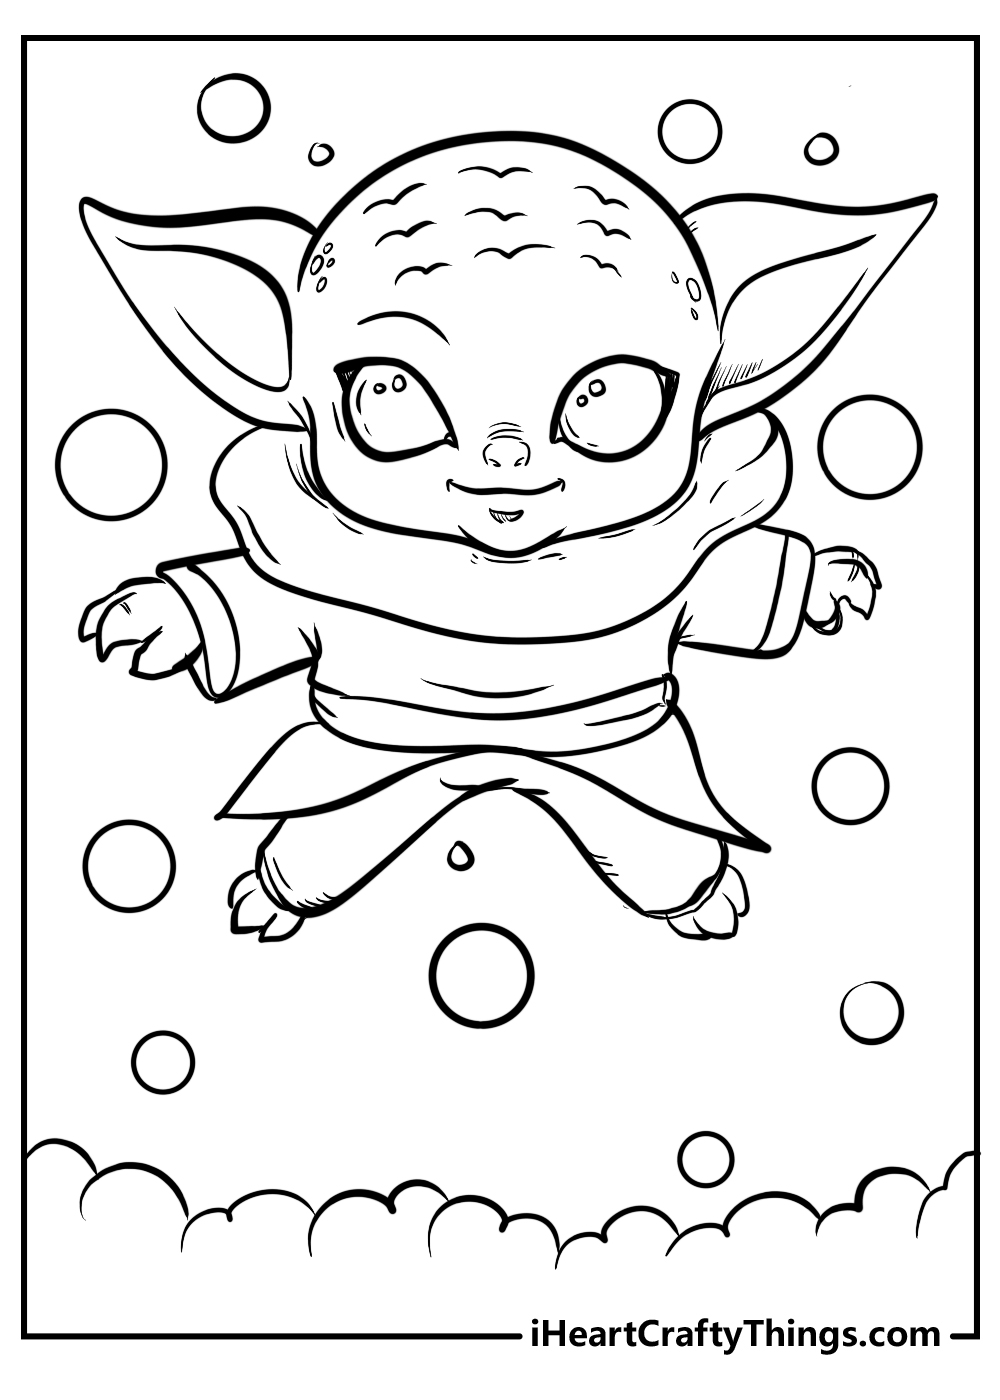 Printable baby yoda coloring pages updated